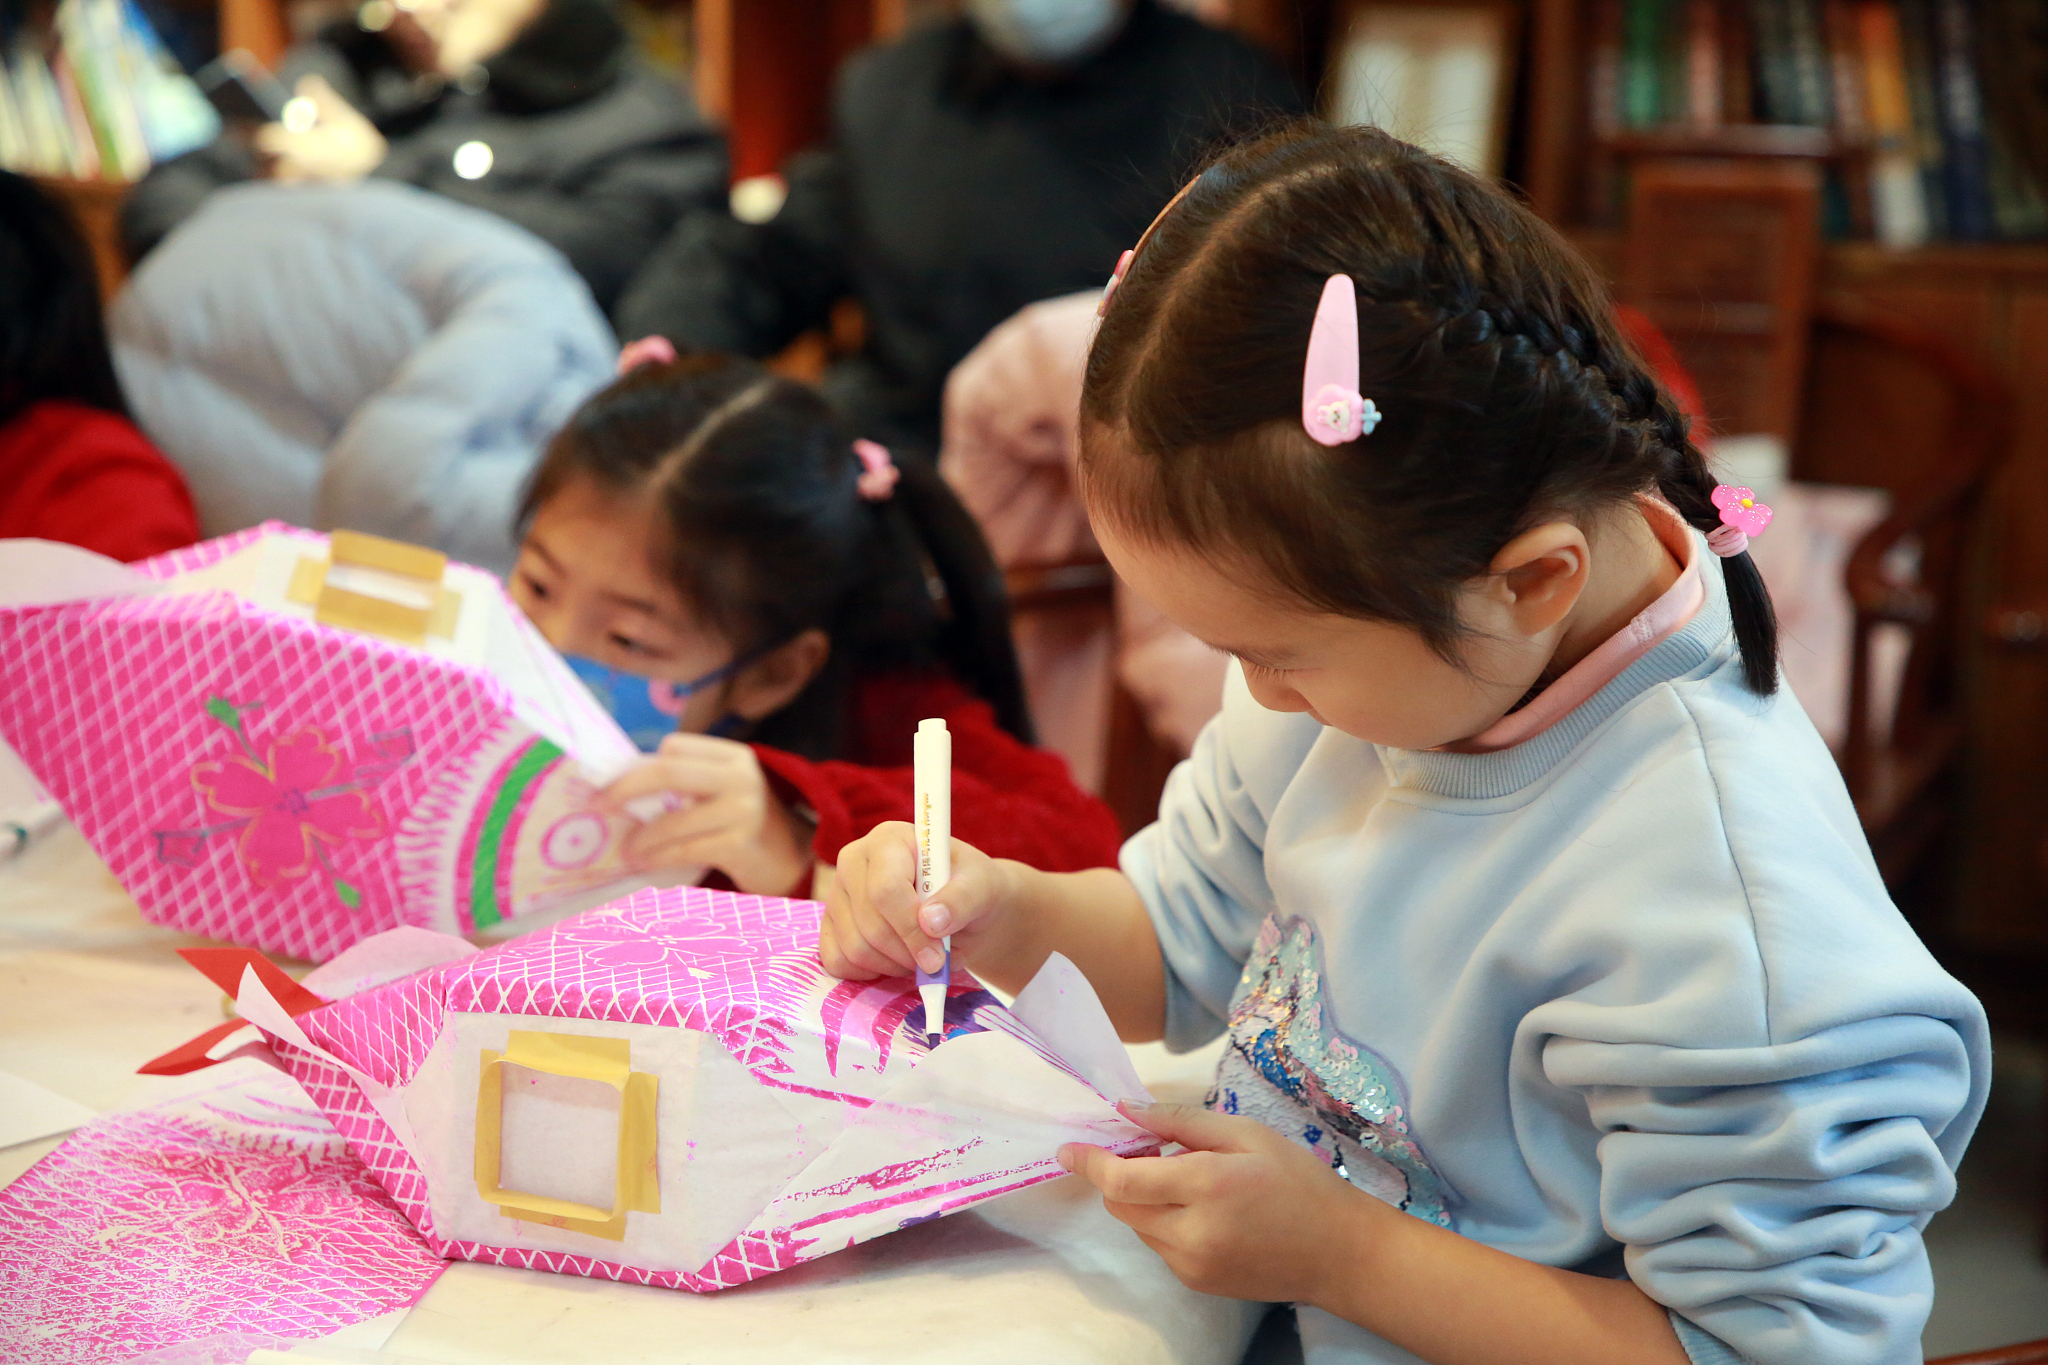 Under the guidance of inheritors of intangible cultural heritage, children discover the joy of creating traditional handmade fish lanterns to celebrate the Lantern Festival, Rizhao City, east China's Shandong Province, February 23, 2024. /CFP